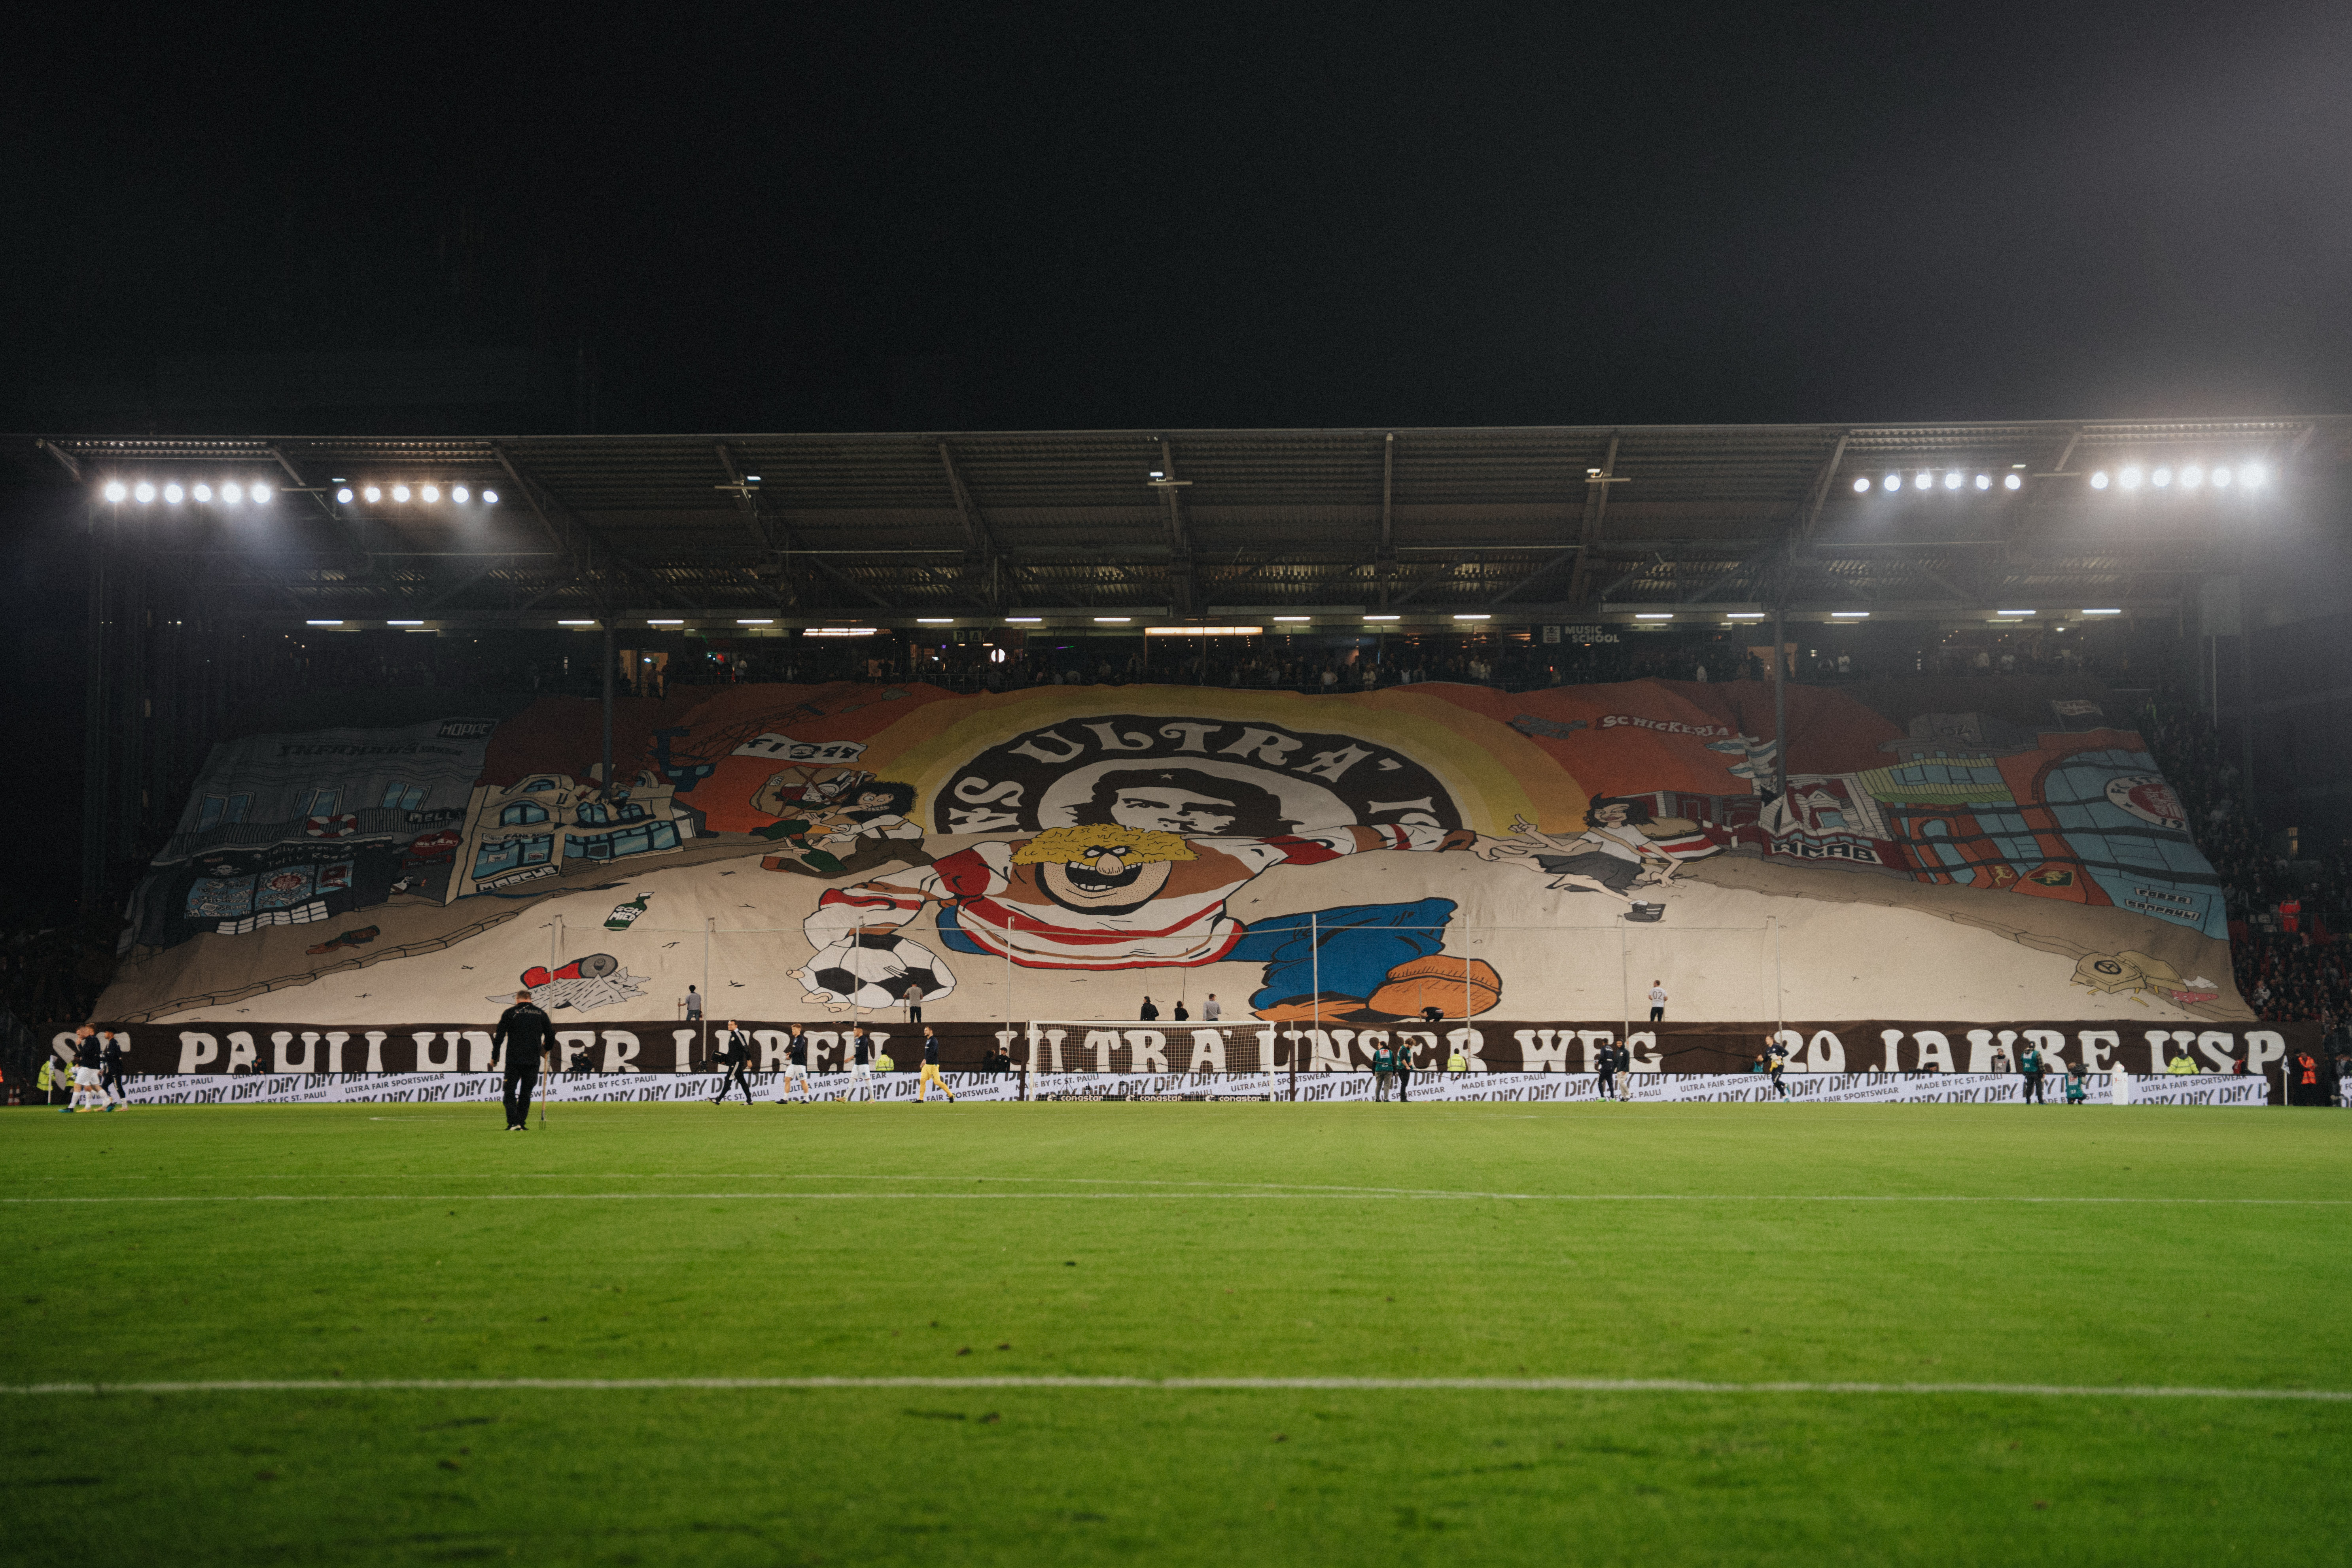 The South Stand displayed a magnificent tifo before the game to mark 20 years of Ultrá Sankt Pauli.